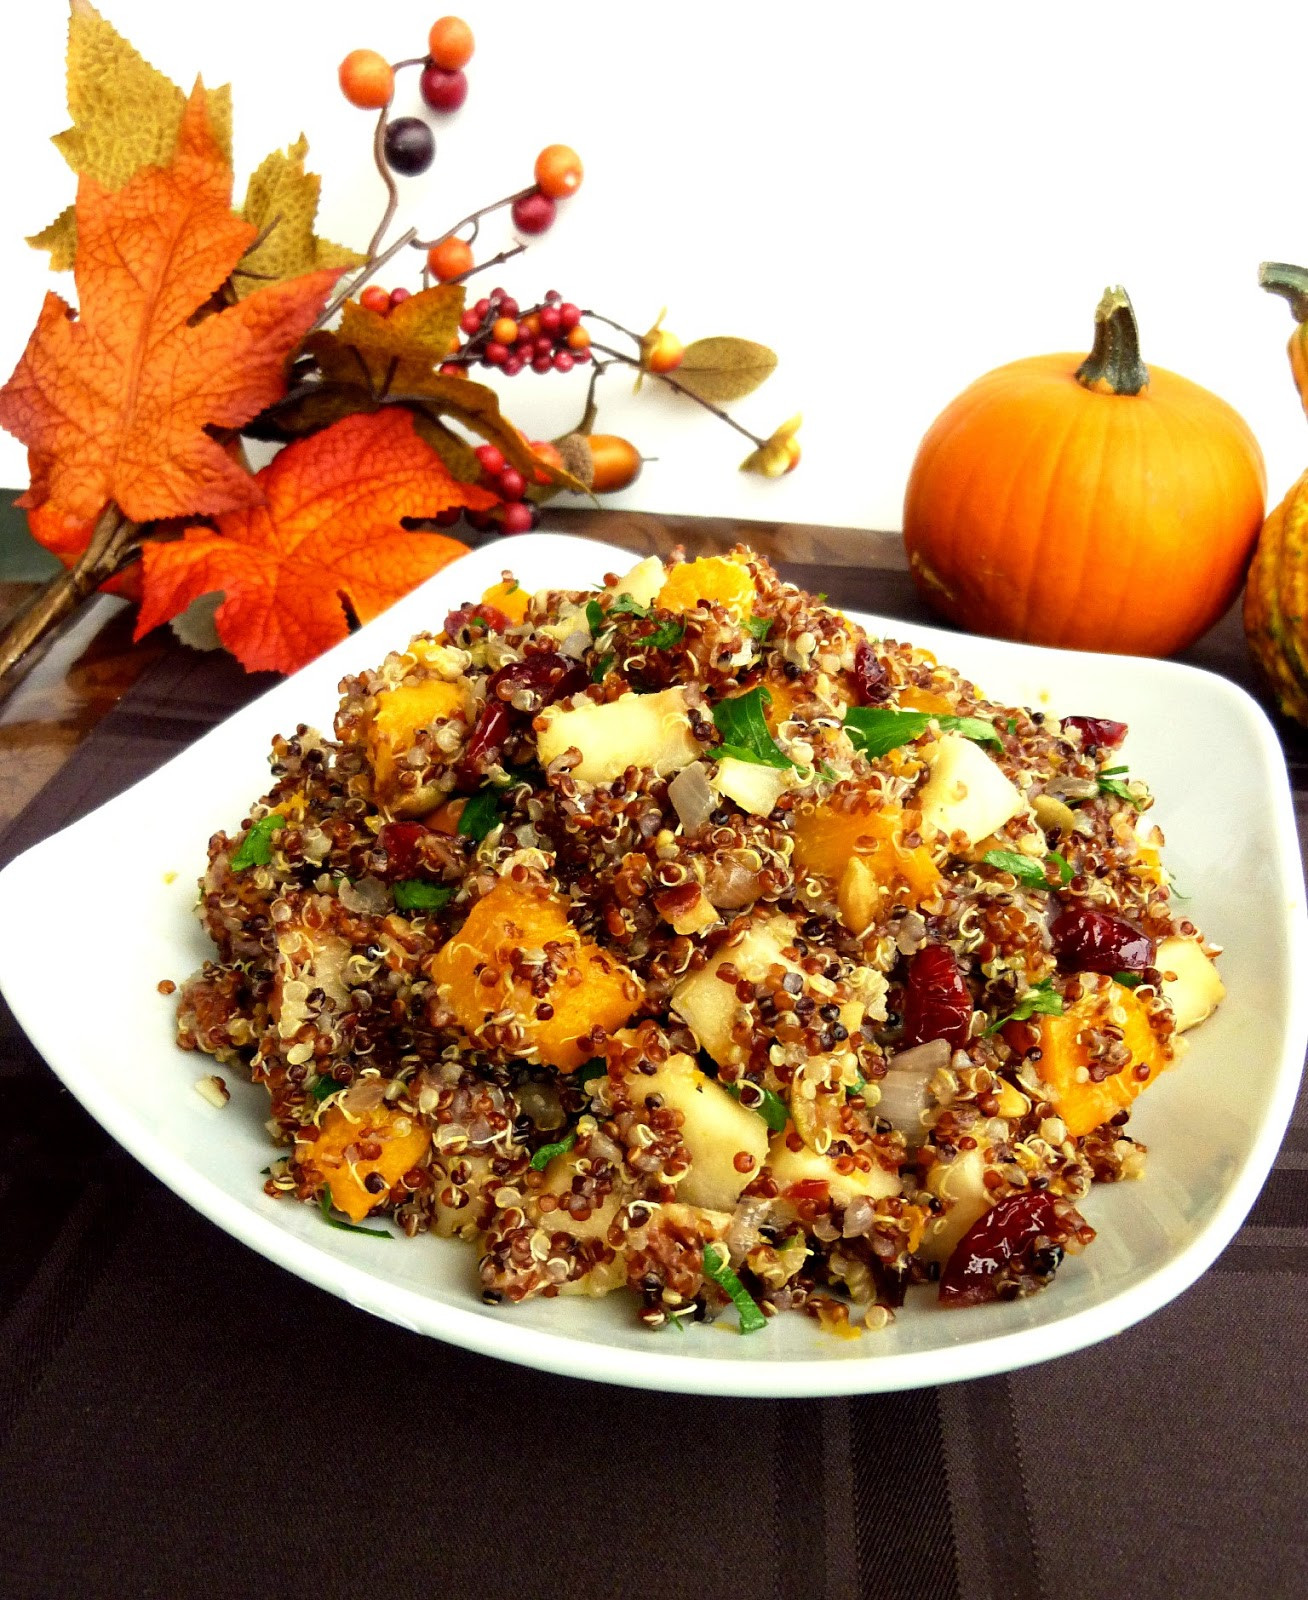 Vegetarian Thanksgiving Main Dishes
 Vanilla & Spice Recipes for a Ve arian Thanksgiving